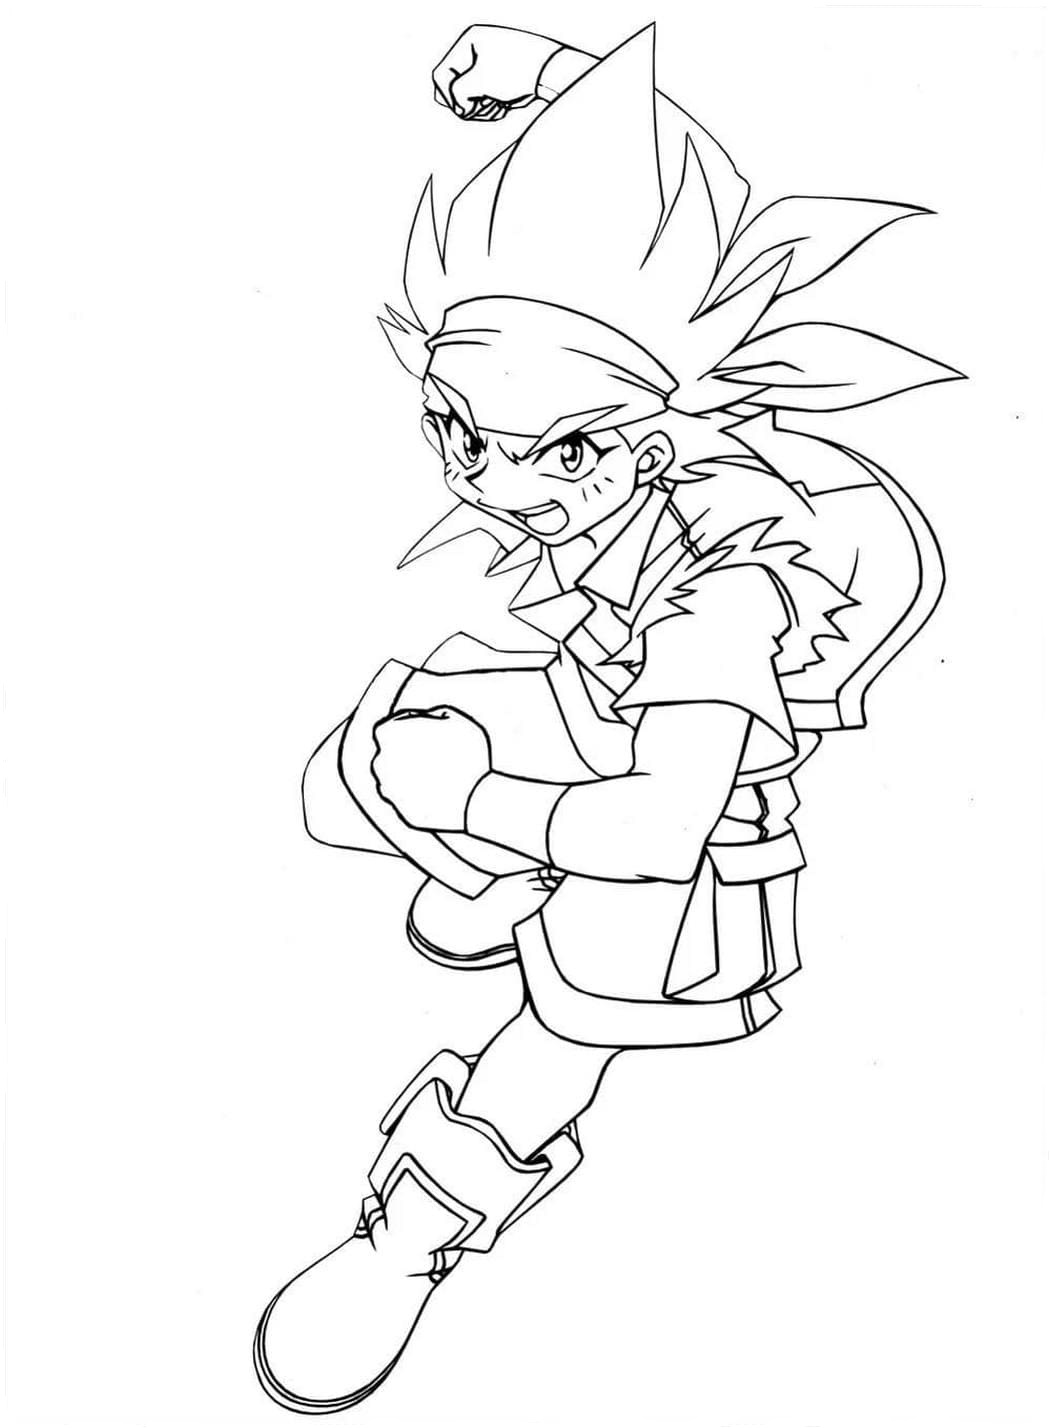 Drawing of a hero attacking from Beyblade